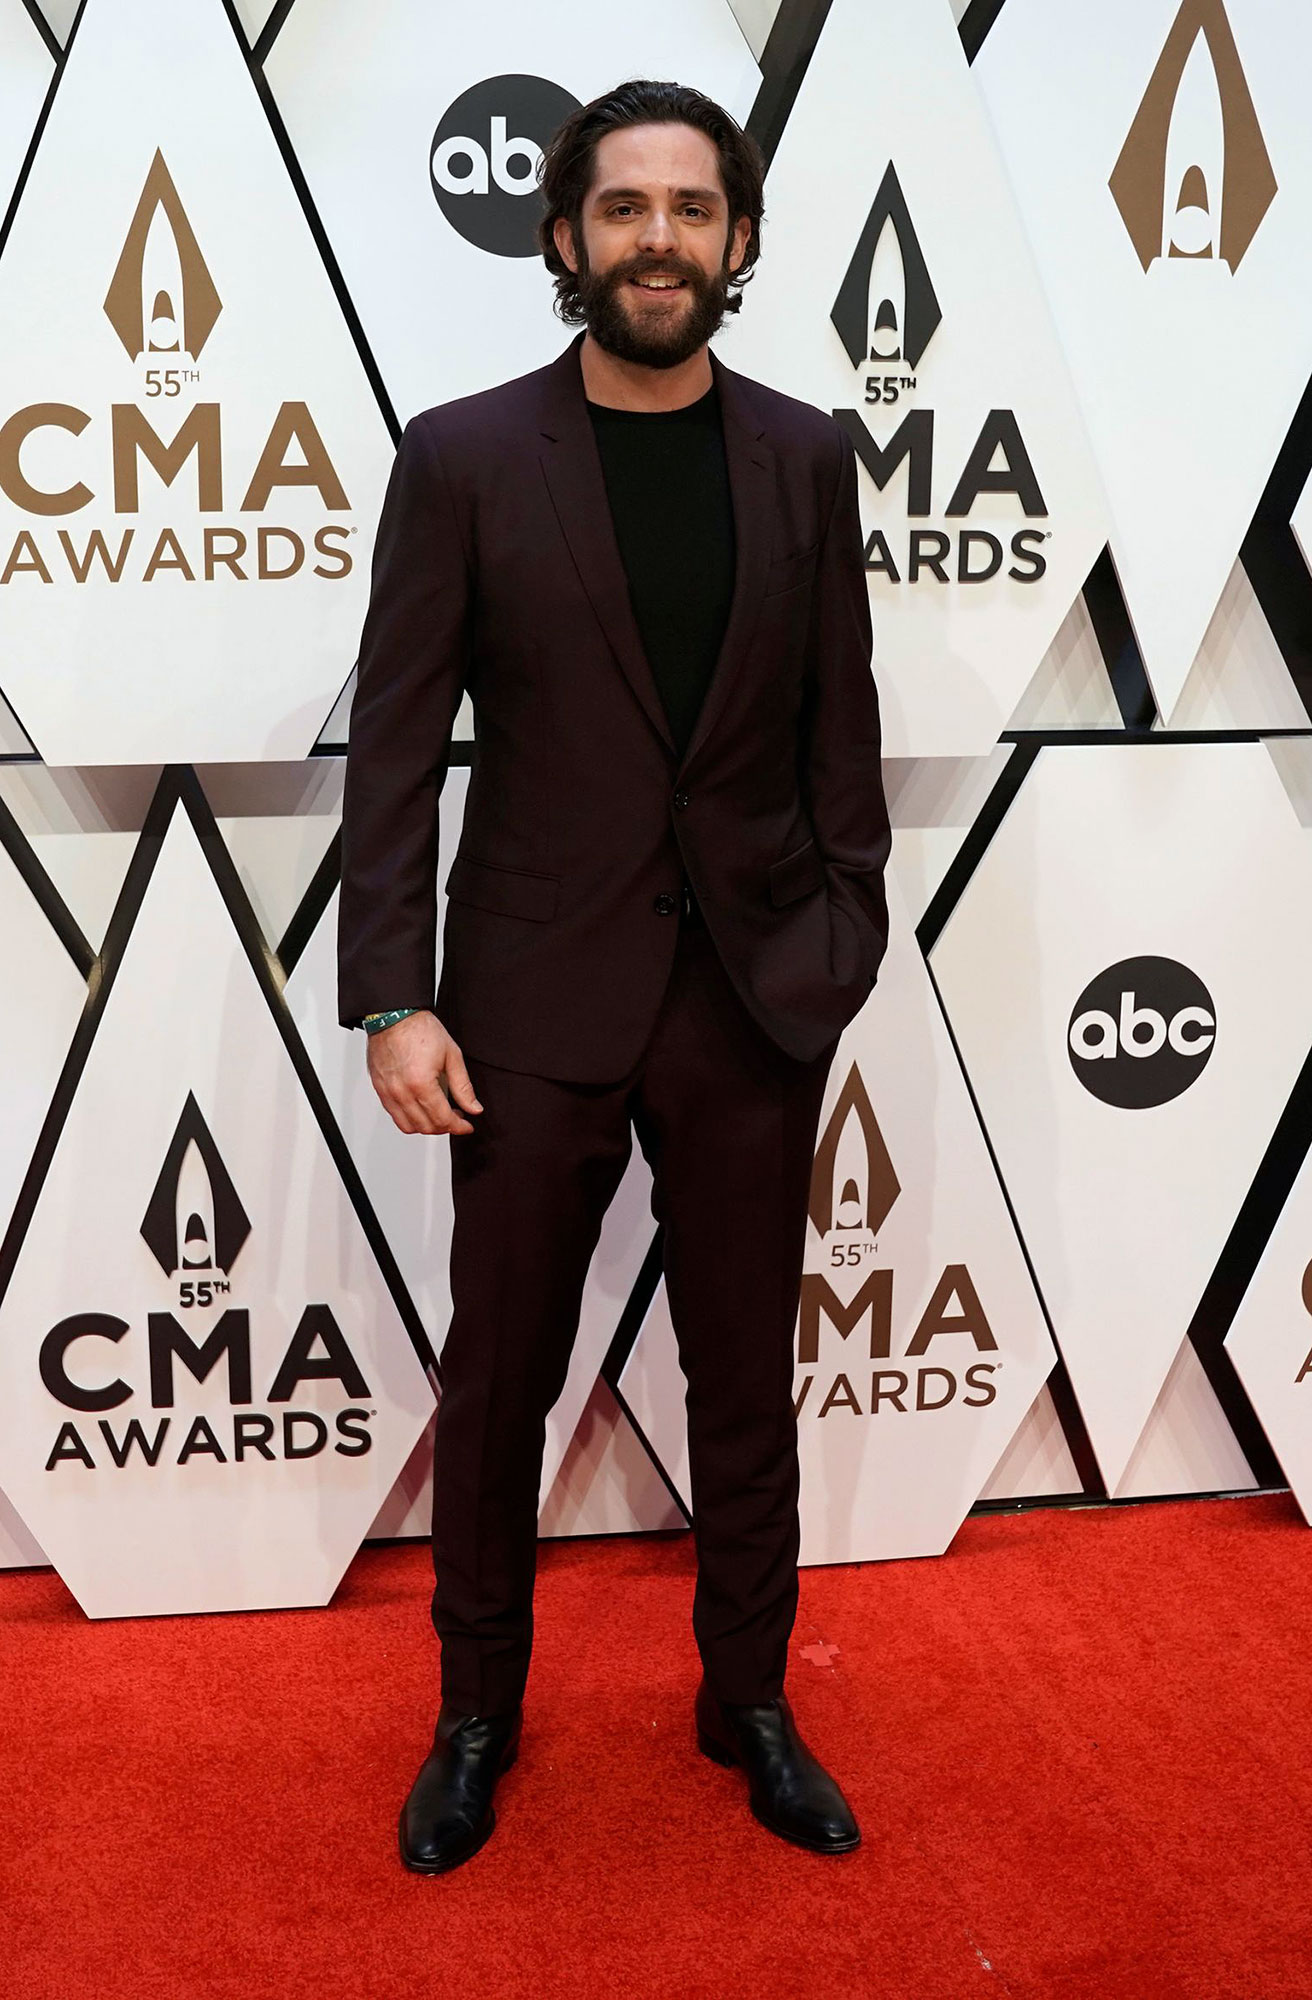 Thomas Rhett These Were the Best Dressed Hottest Men at the 2021 CMA Awards